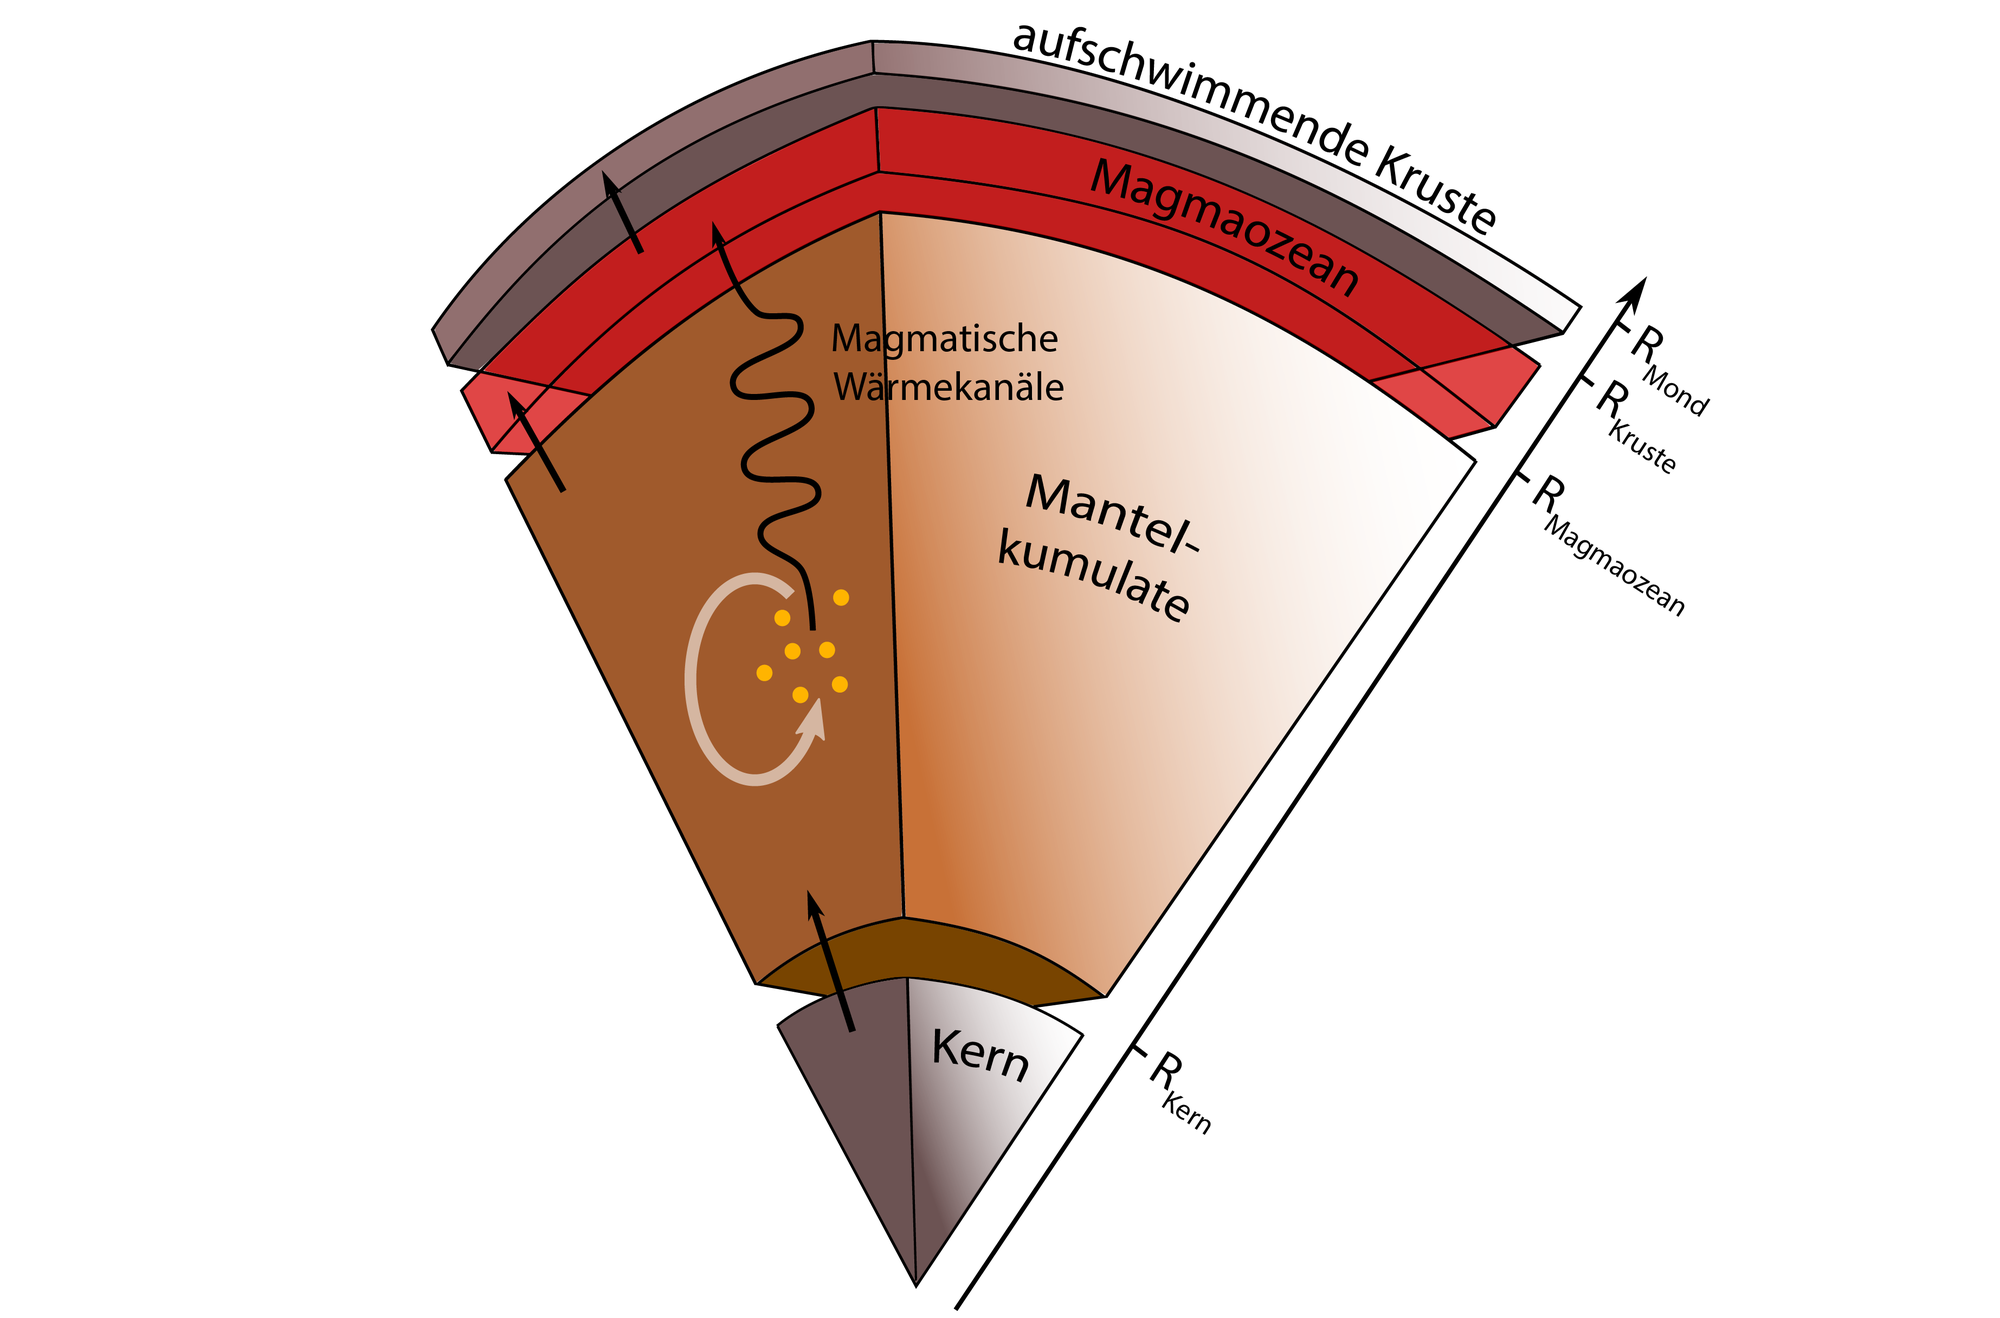 Schematic structure of the early Moon’s interior